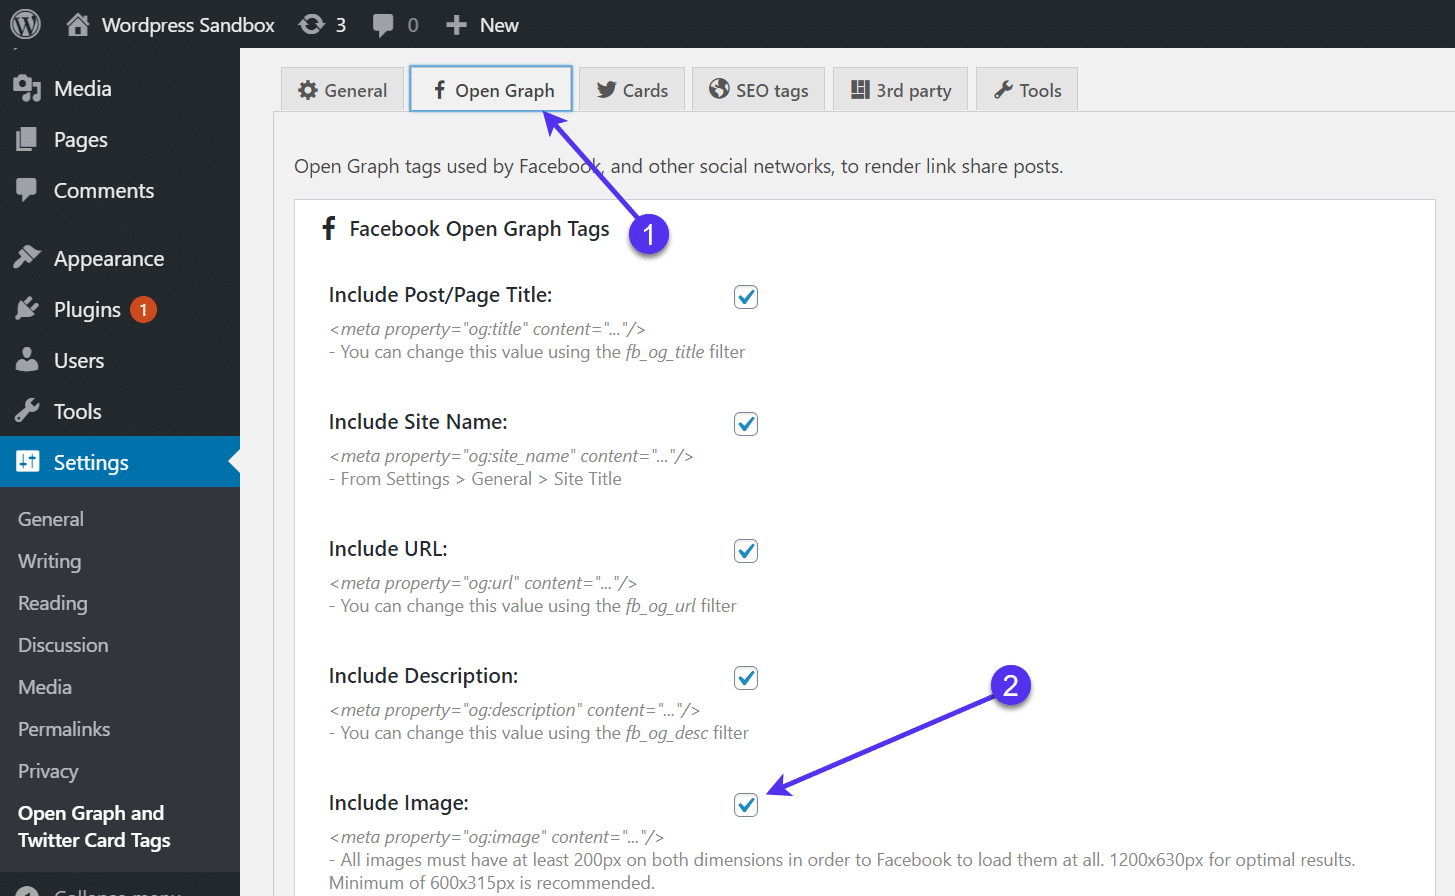 The 'Open Graph' settings tab